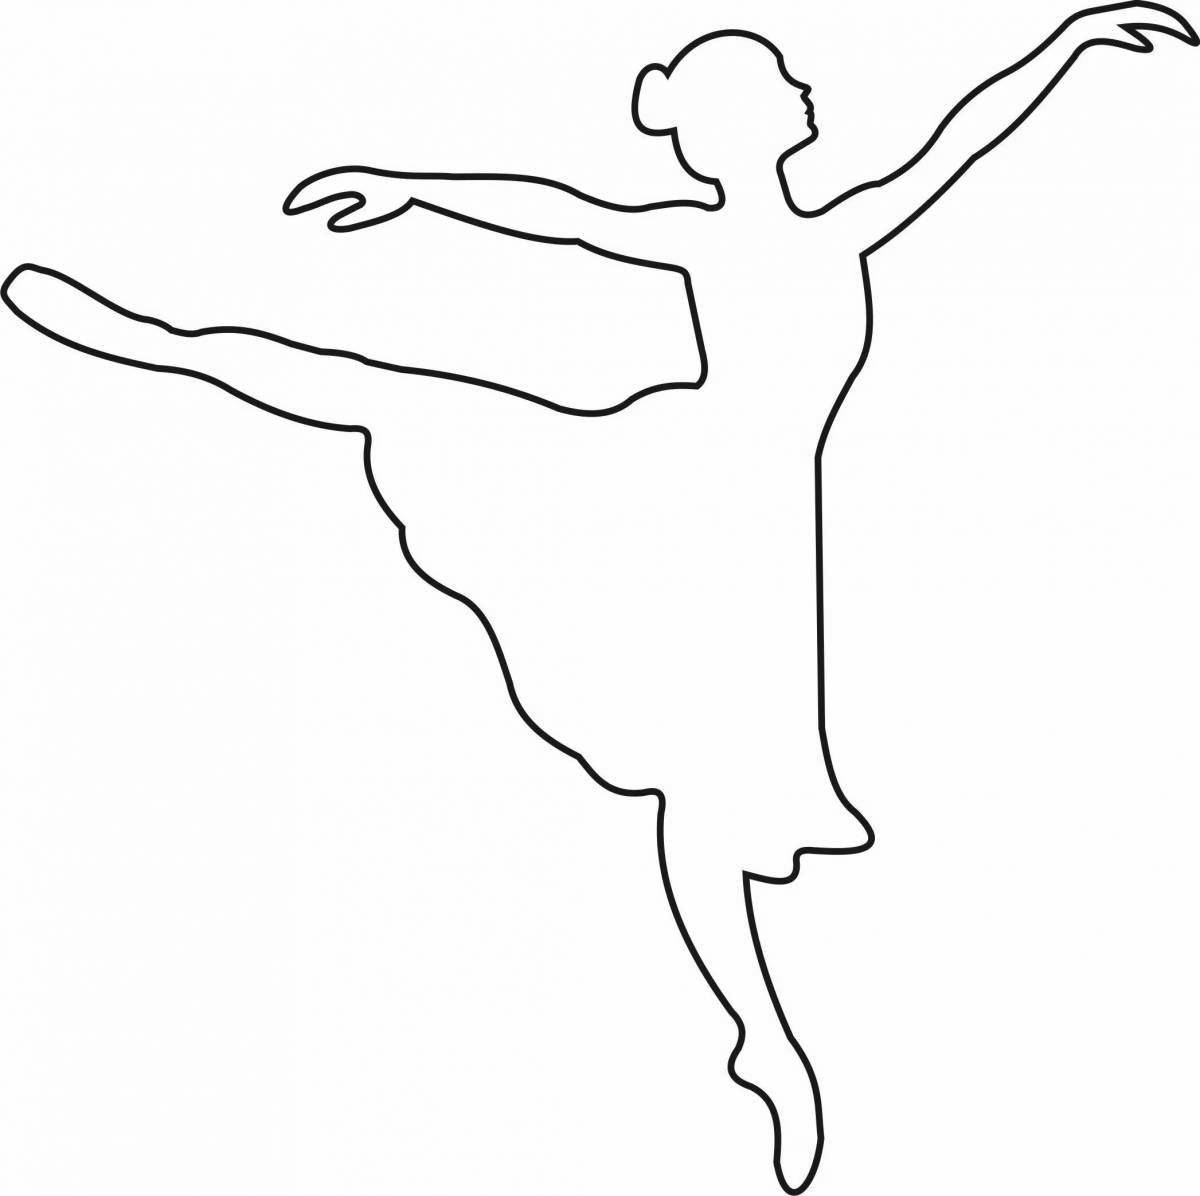 Coloring book silhouette of a cheerful ballerina